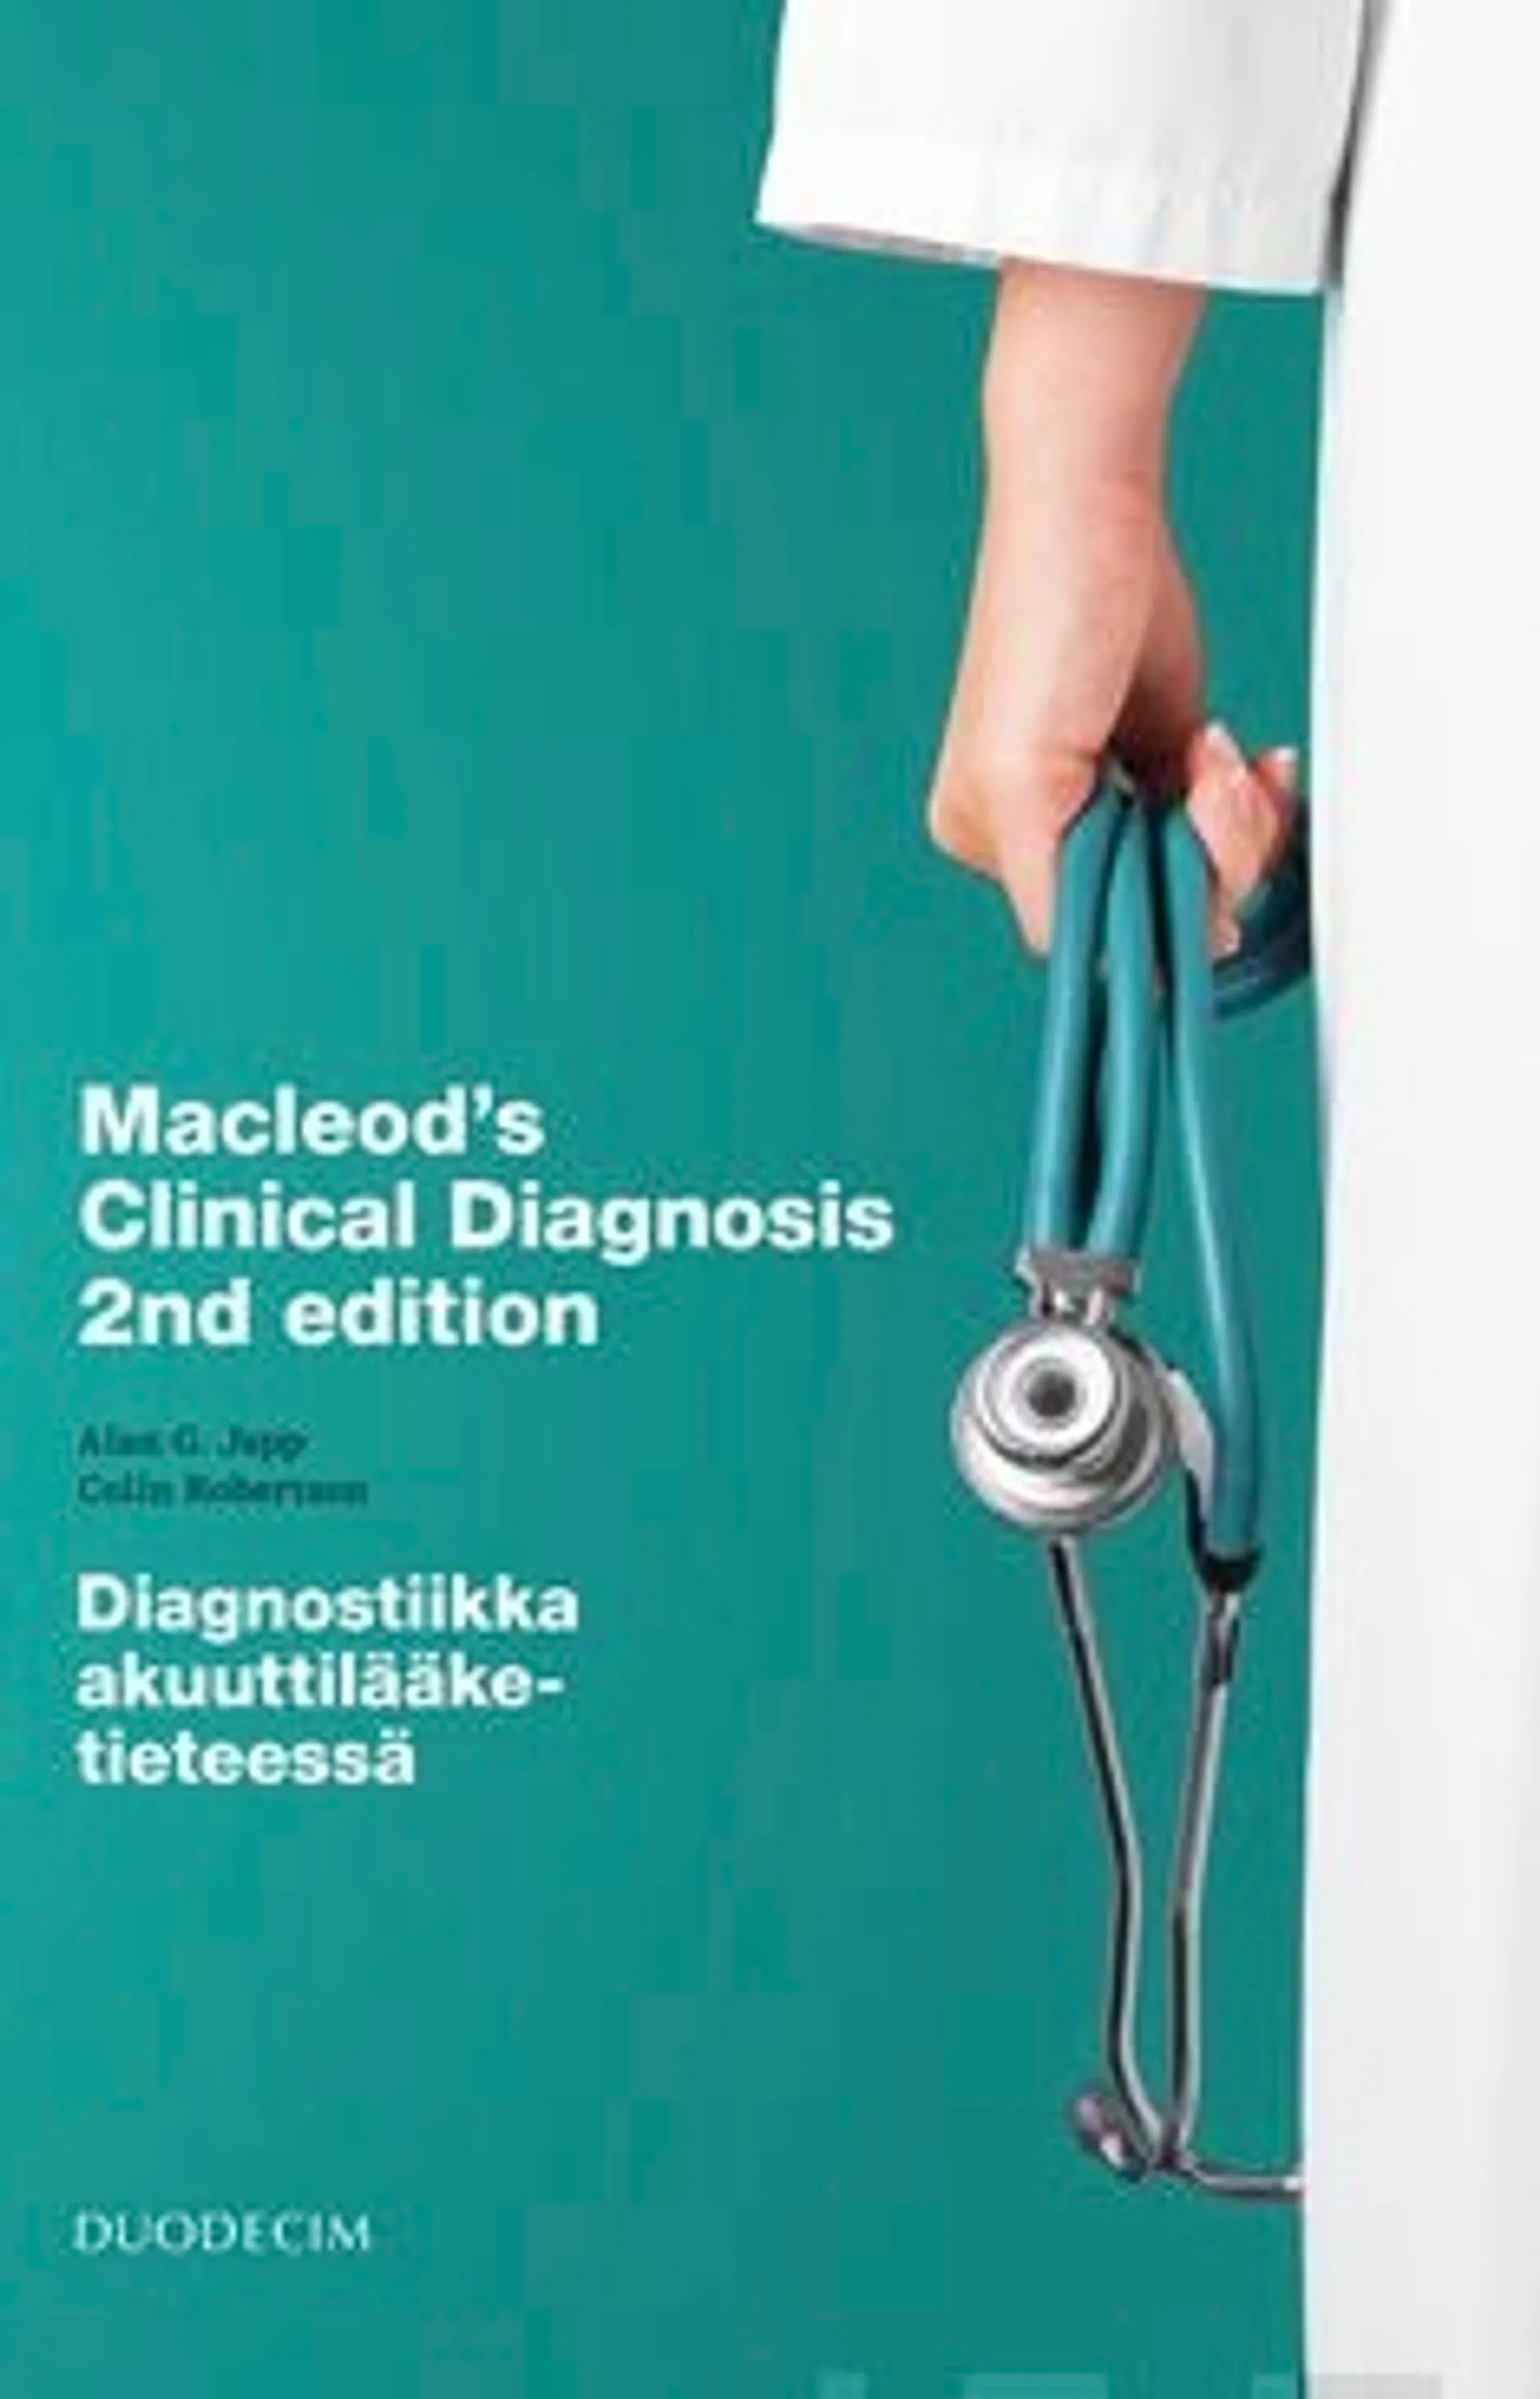 Japp, Macleod's Clinical Diagnosis 2nd edition